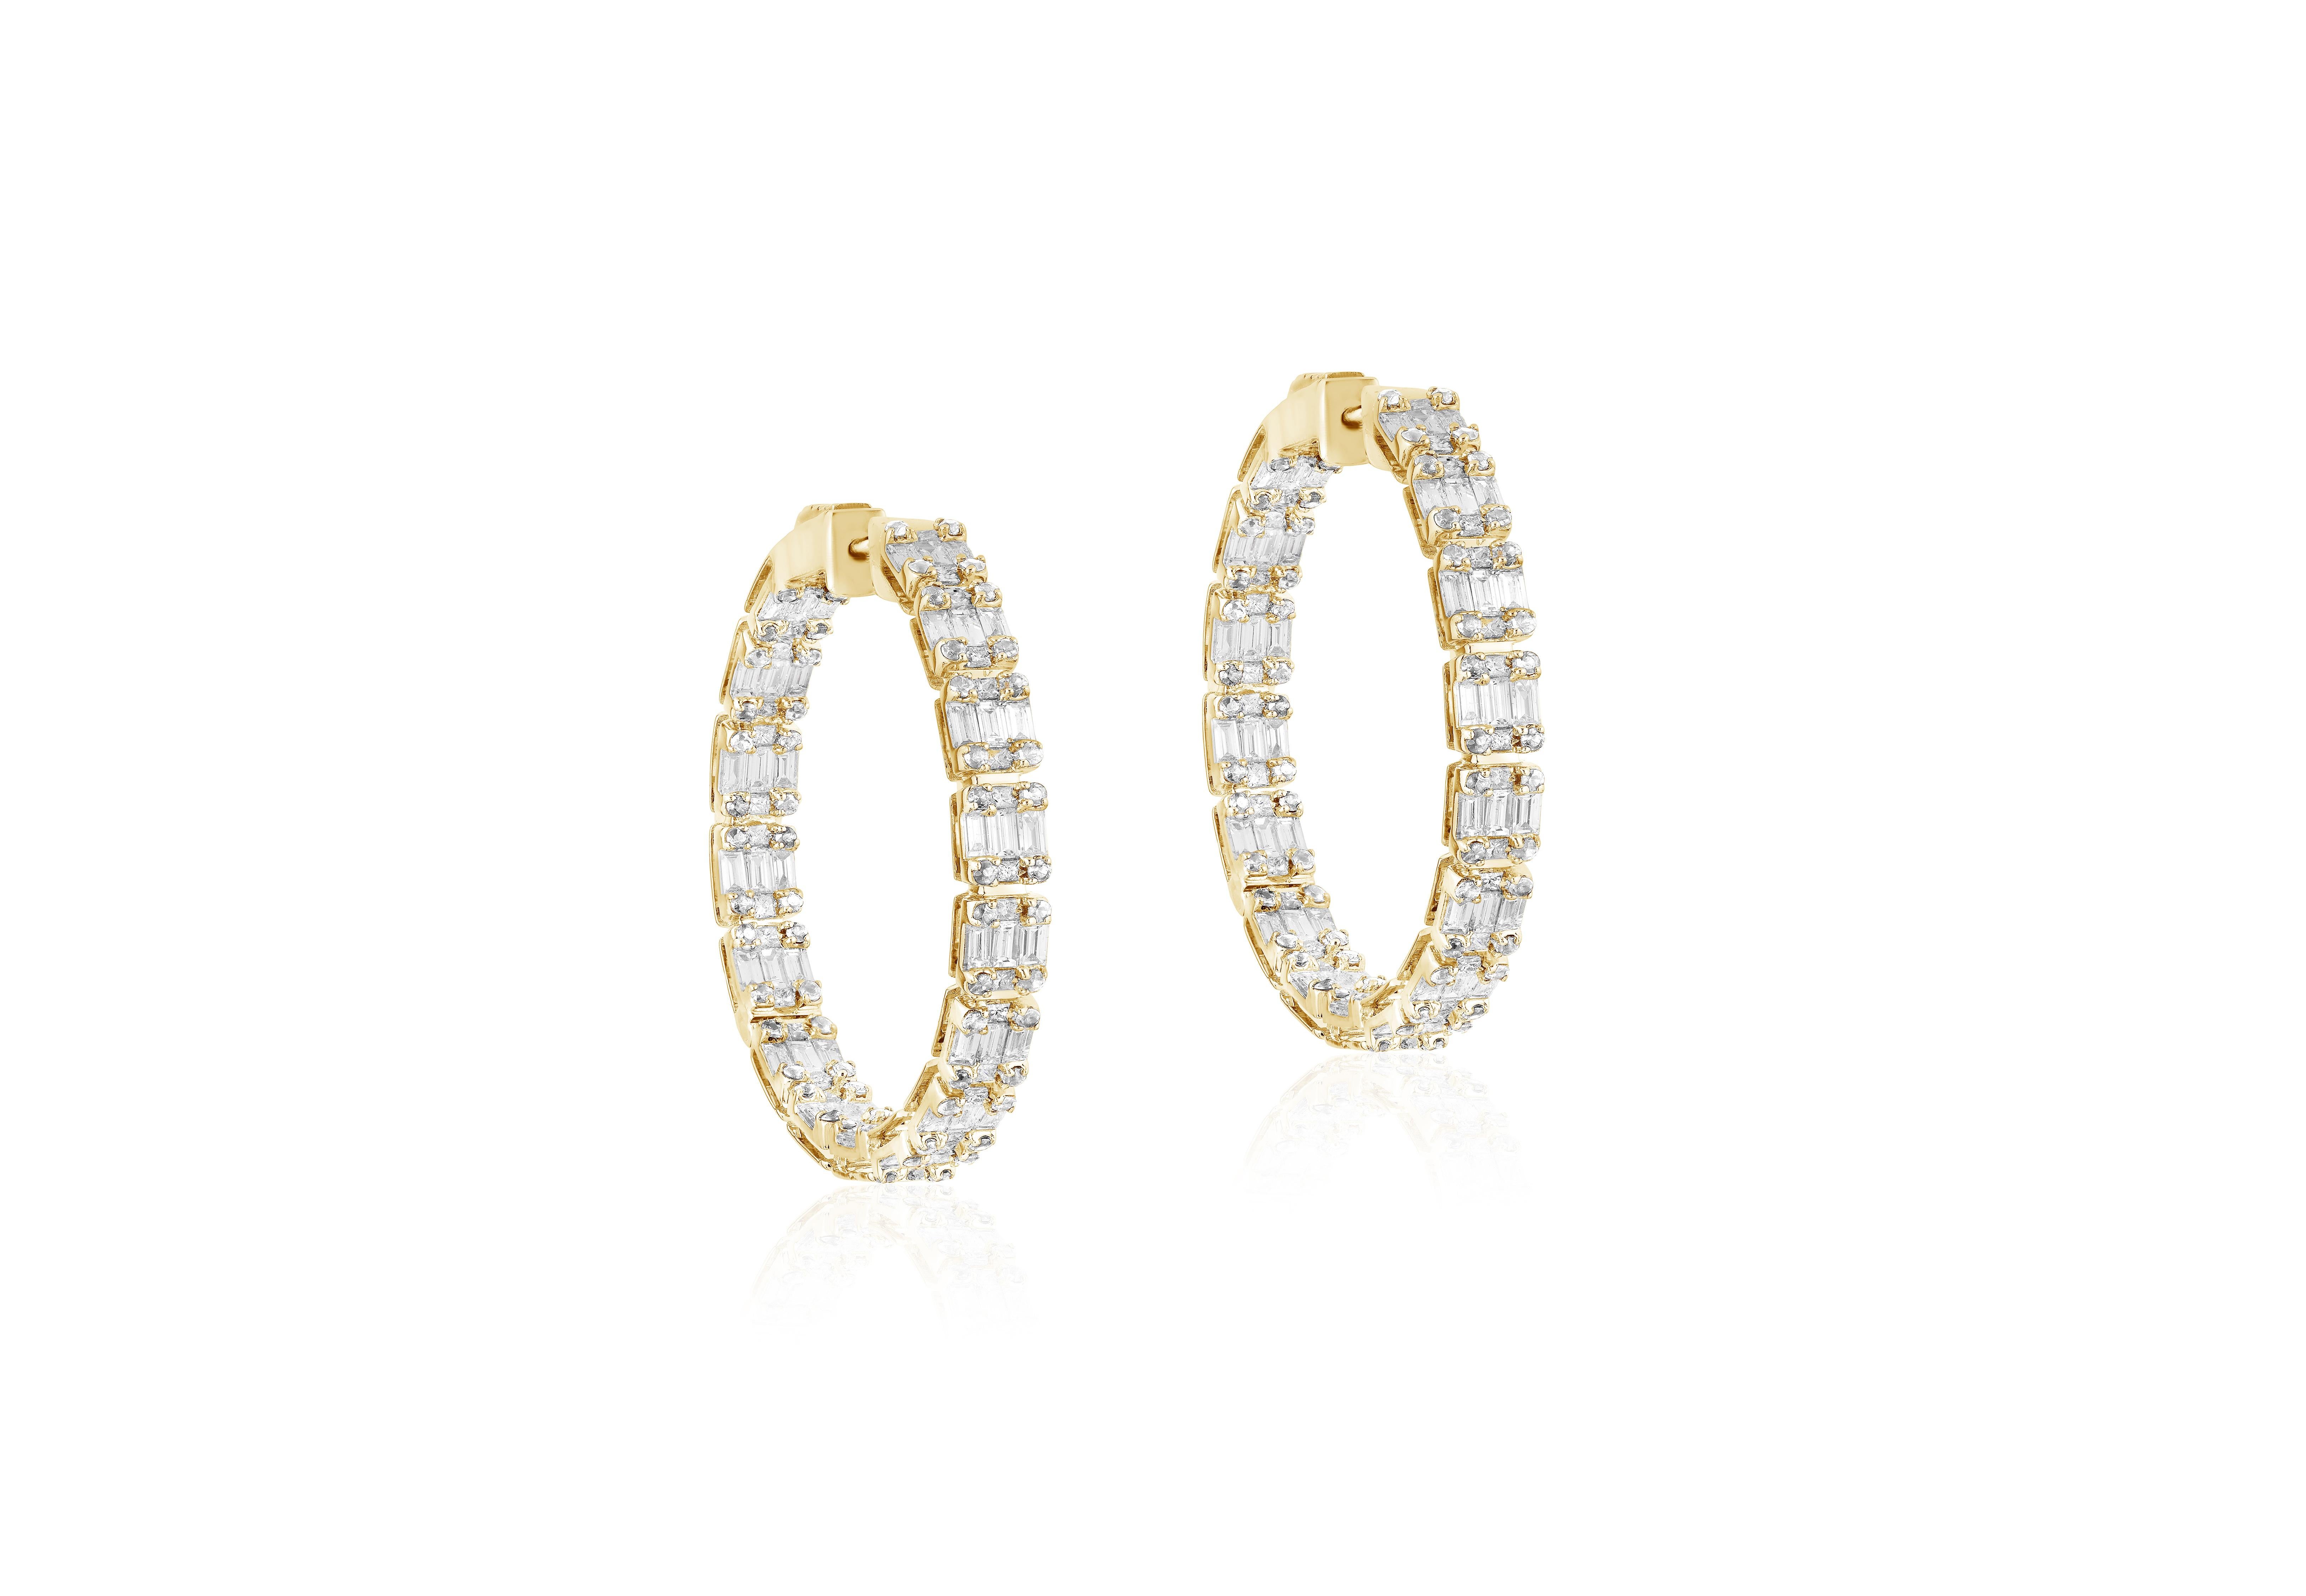 Stunning Inside-Outside Diamond Hoop Earrings in 18K Yellow Gold, from 'G-One' Collection. These earrings are perfect to wear day or night. They will make you stand out!

* 100% Natural Earth-Mined Diamonds
* Carat: Approx.: 4.40 Carats (Diamonds)
*